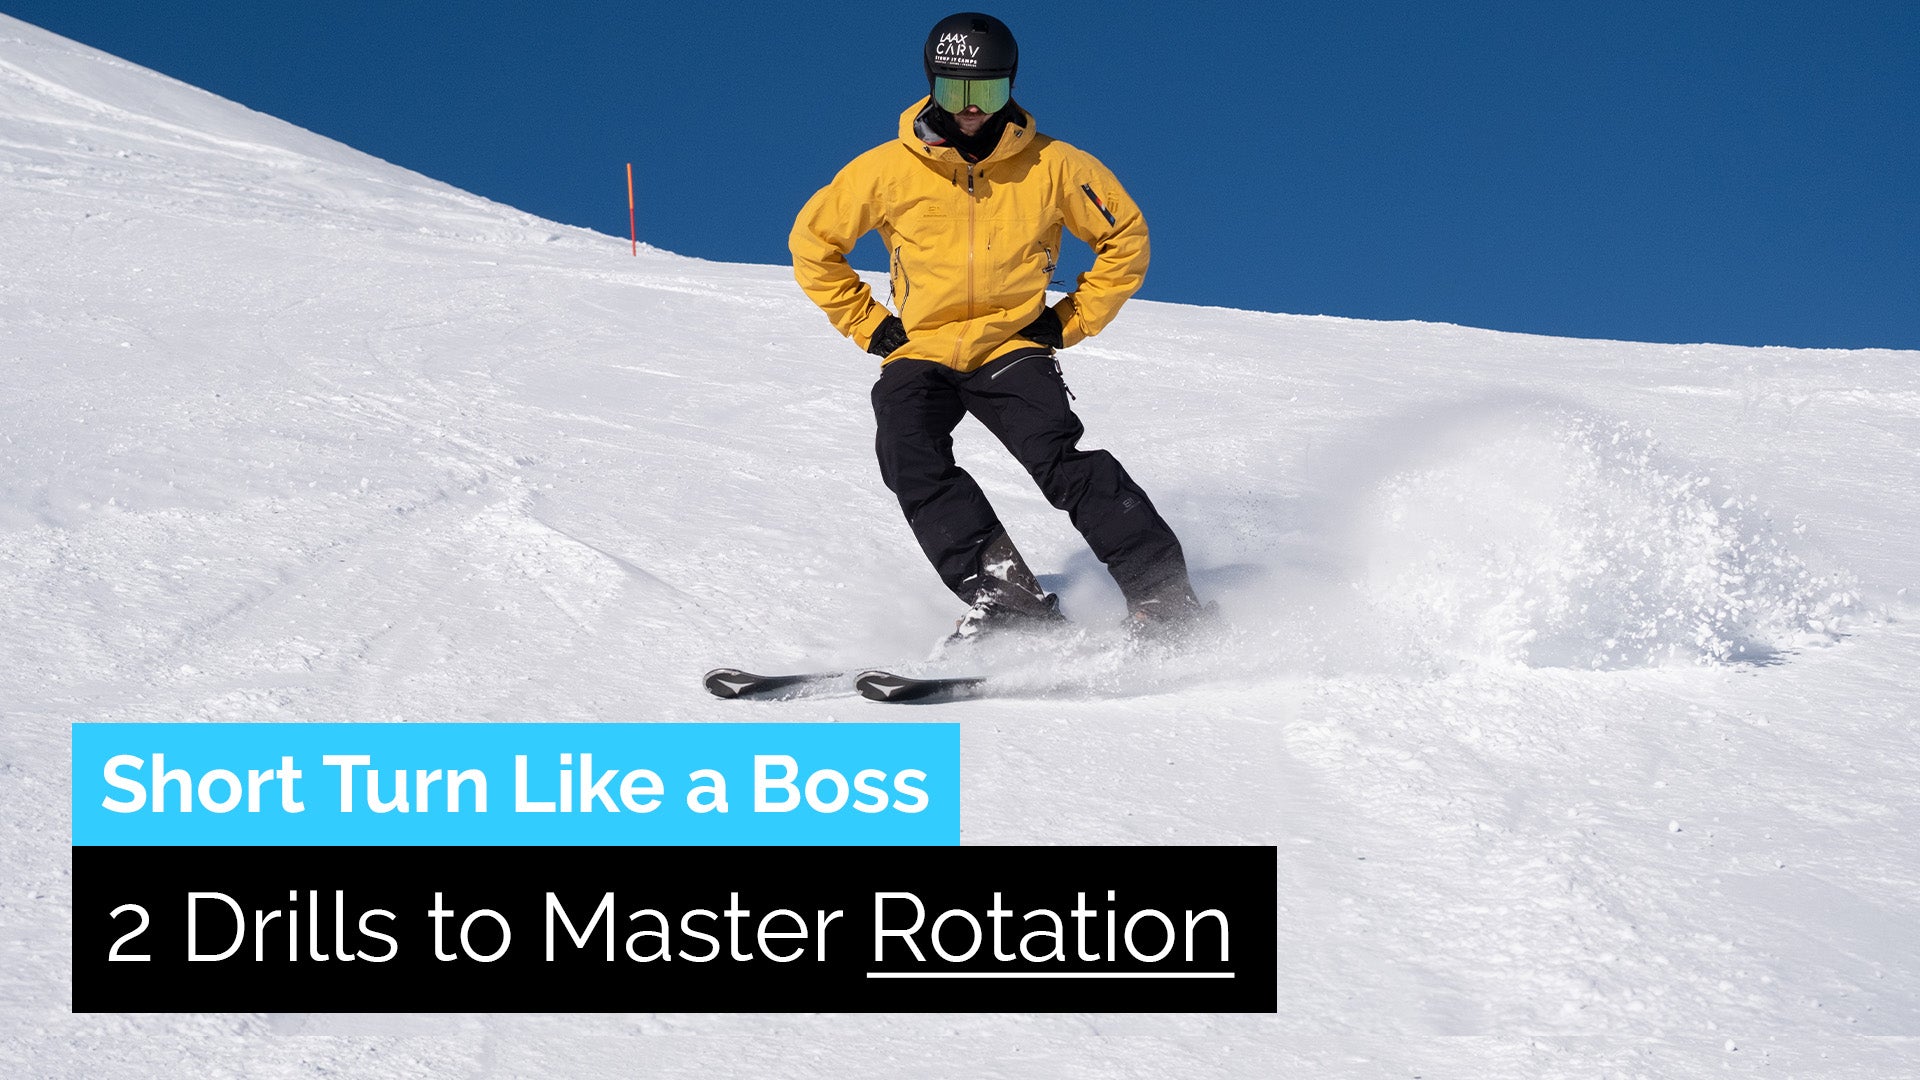 How to Short Turn on Skis, 2 Drills to Master Rotation | Drill Bits